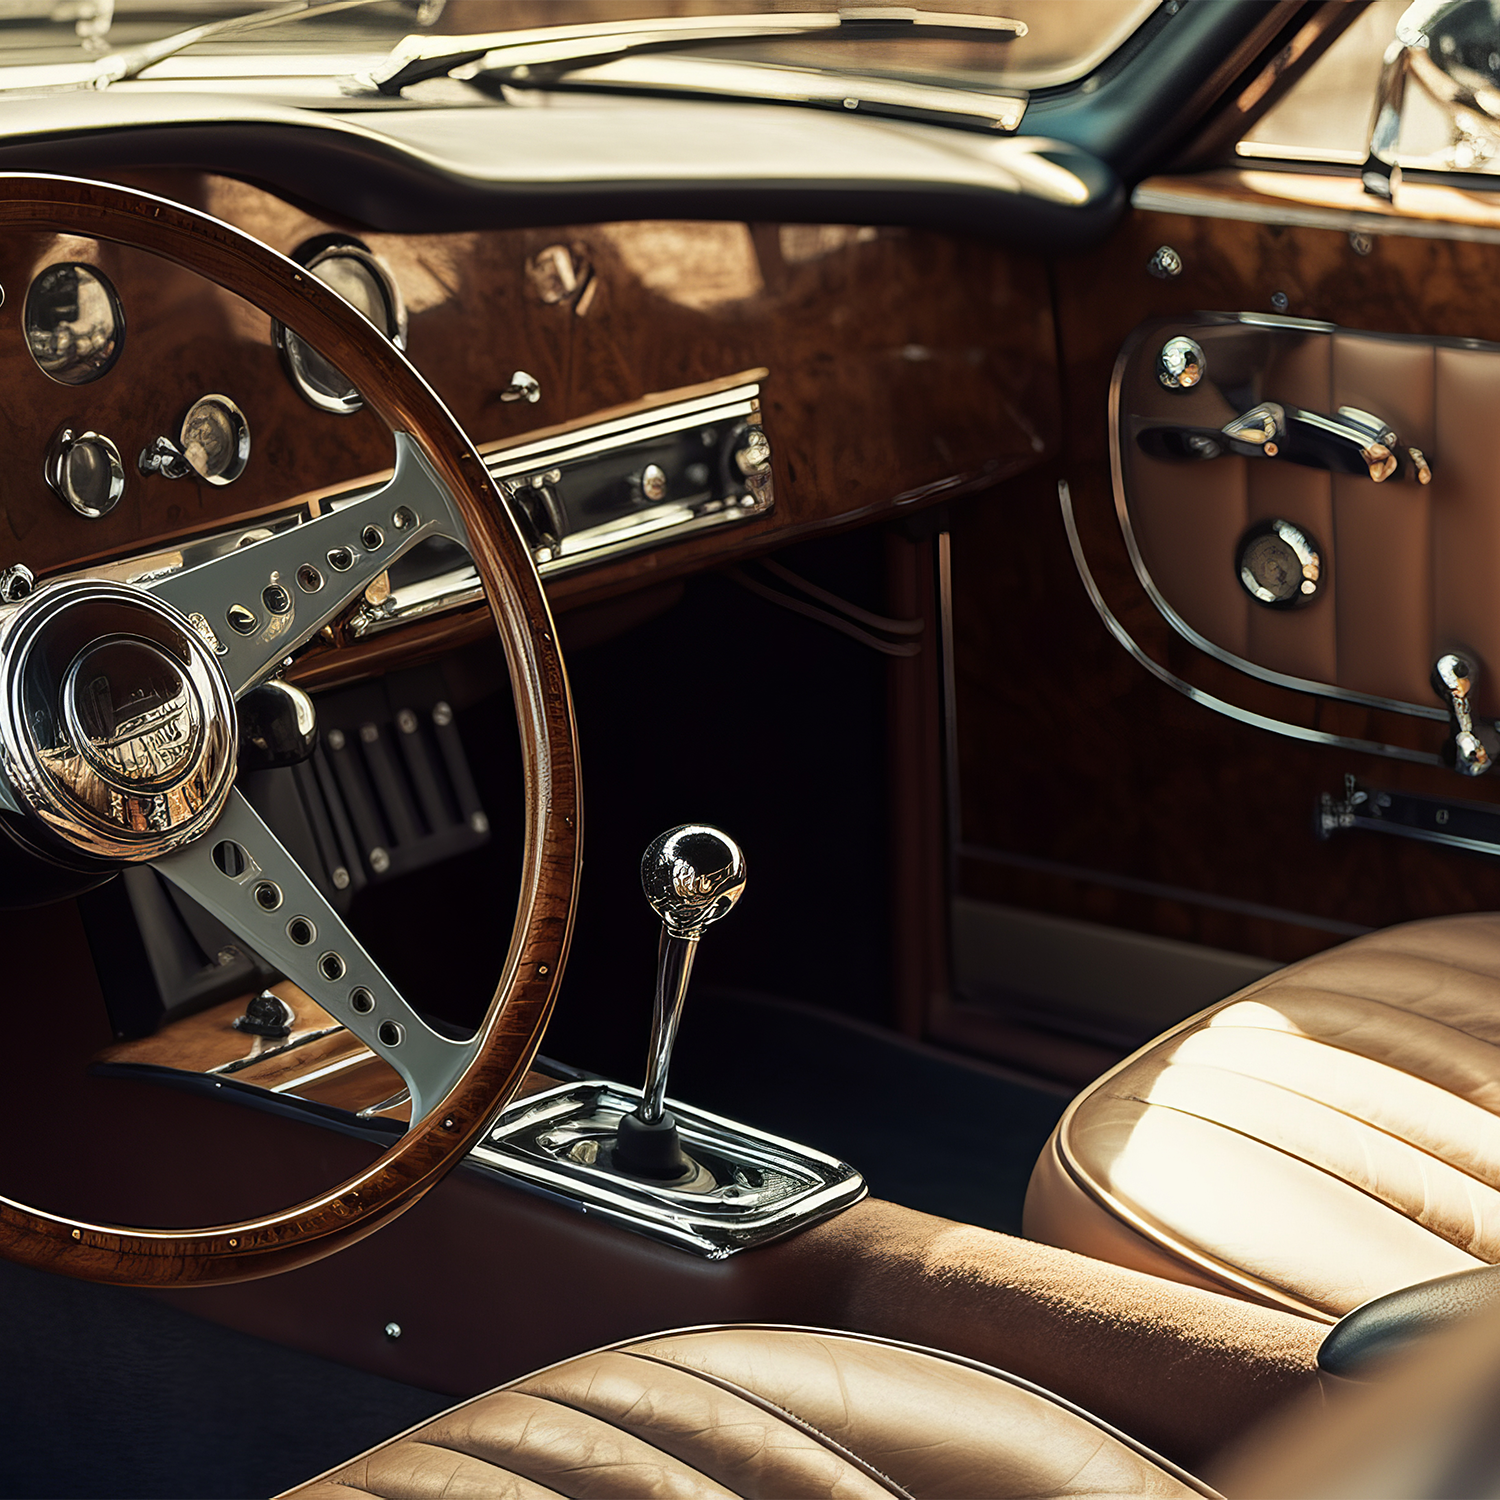 The steering wheel of a Classic Cars Scented Jar Candle (12 oz) from the Rugged Retreat Collection by Tuscany Candle SEASONAL is adorned with sunbaked leather, exuding a rich and nostalgic aroma of teakwood. Its captivating scent evokes memories of cruising down the open road.